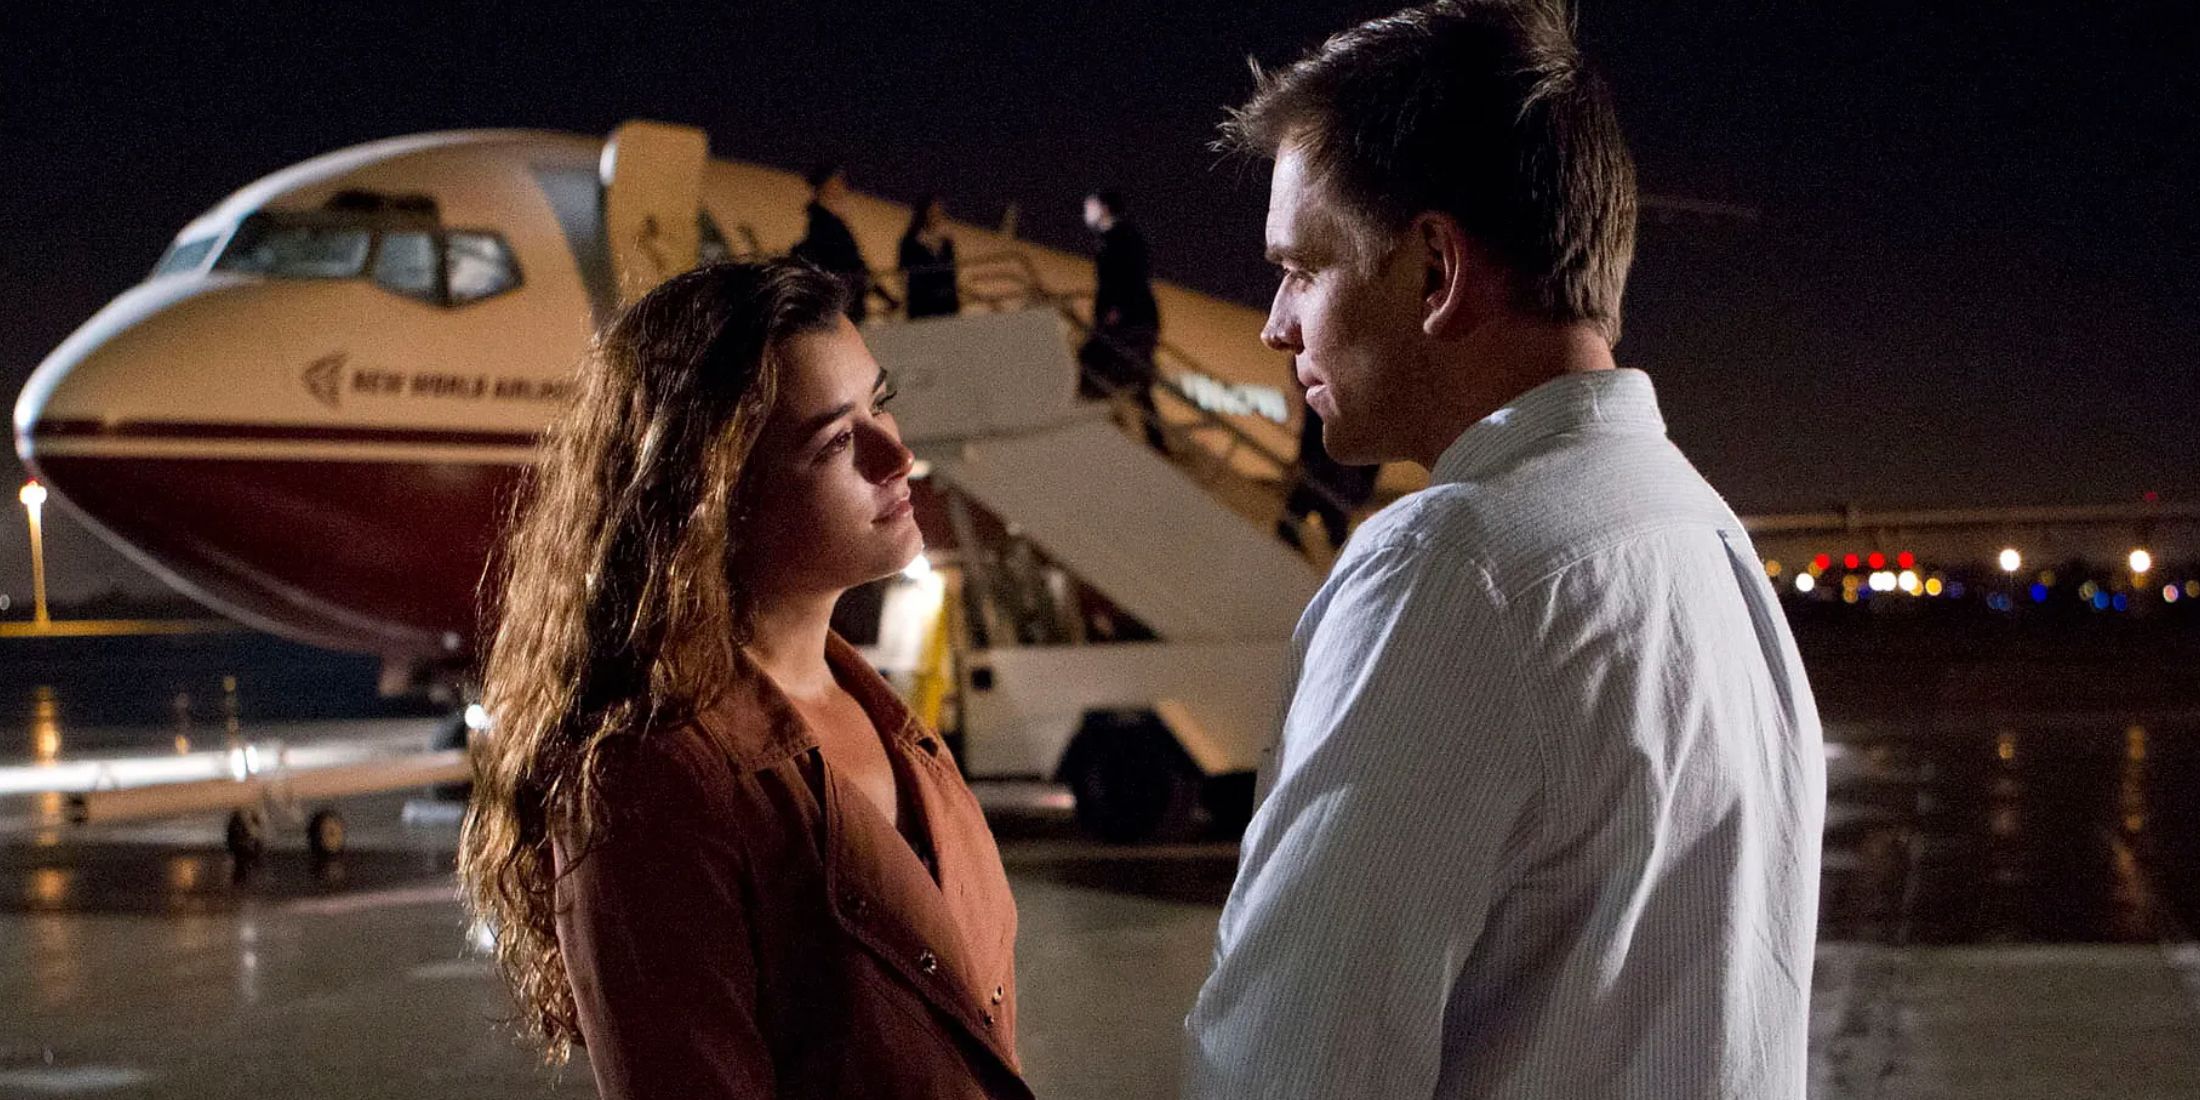 Ziva and Tony saying goodbye in front of an airplane when Cote de Pablo exited NCIS in season 13